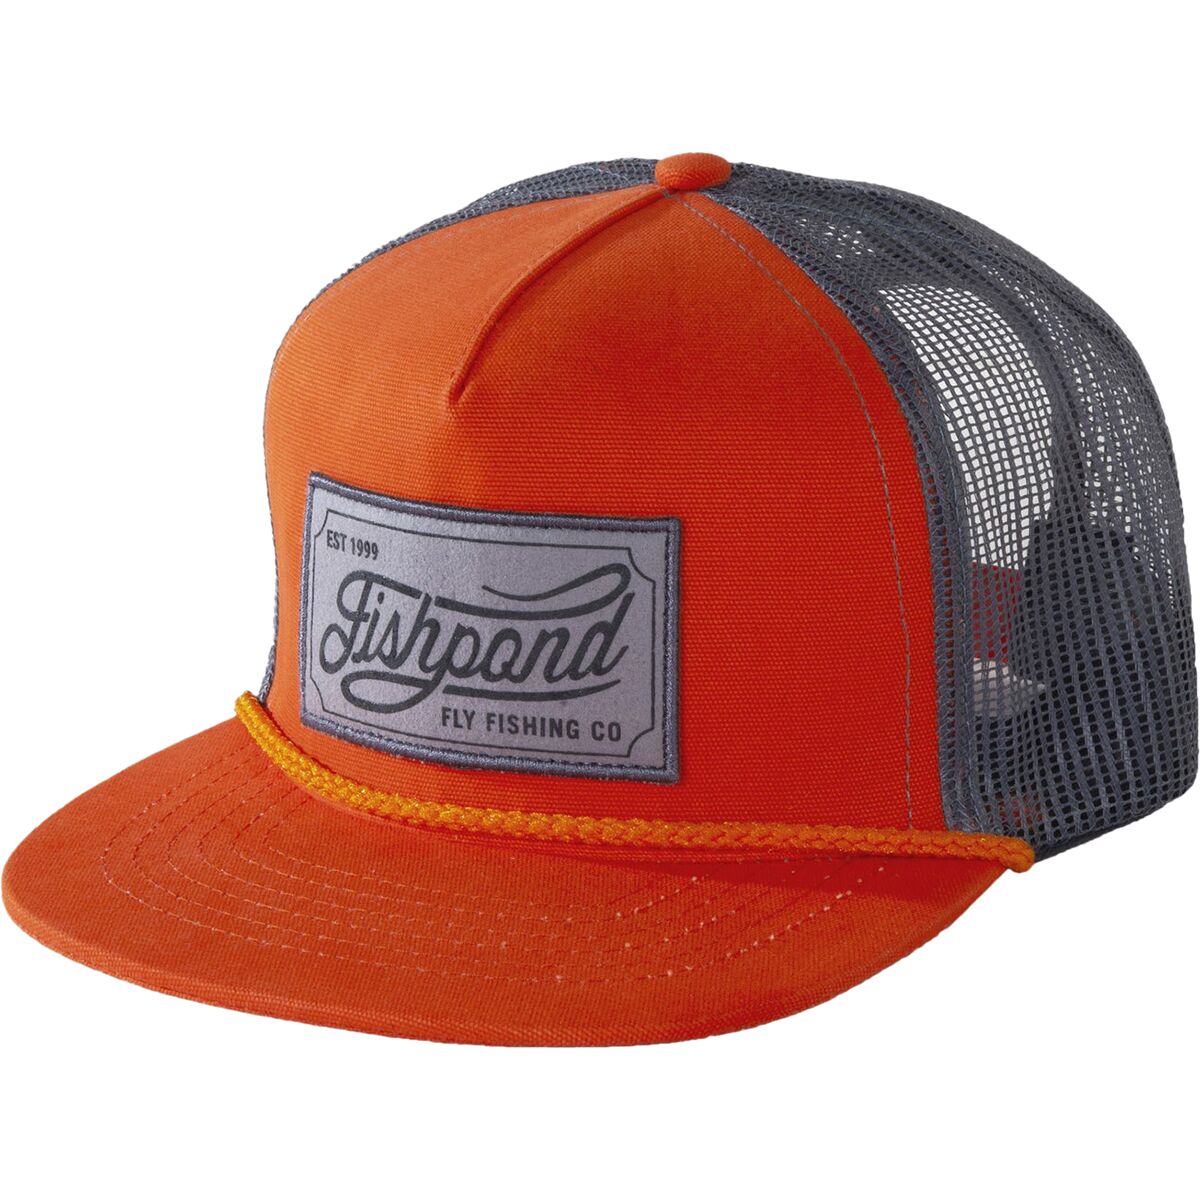 Fishpond Heritage Trucker Hat - Fly Fishing | Backcountry